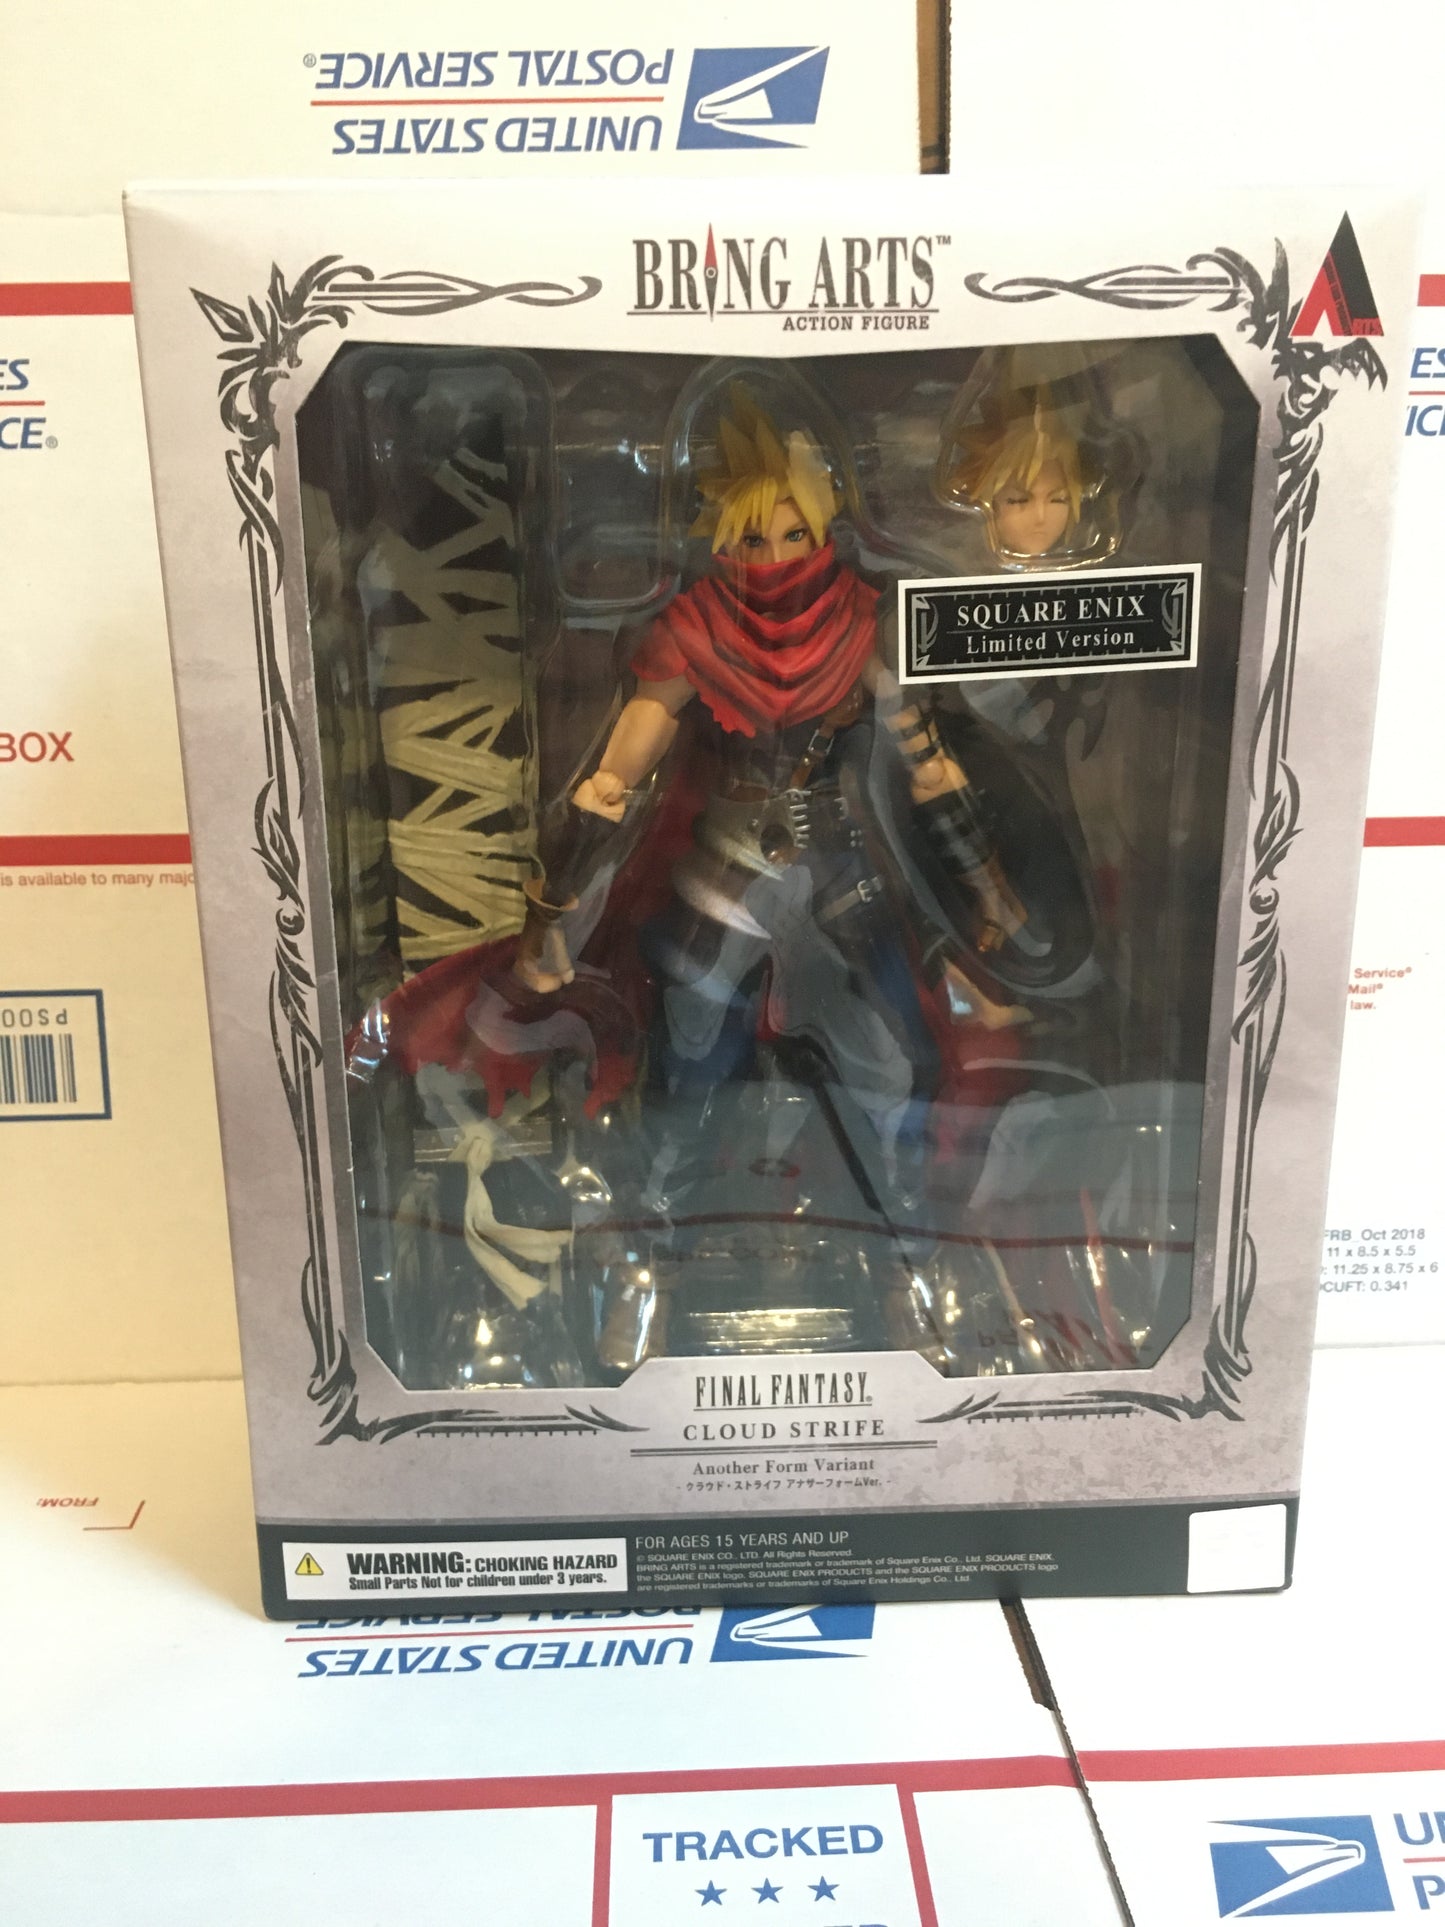 Kingdom Hearts Final Fantasy Bring Arts Cloud Strife Another Form Limited Edition (Used)